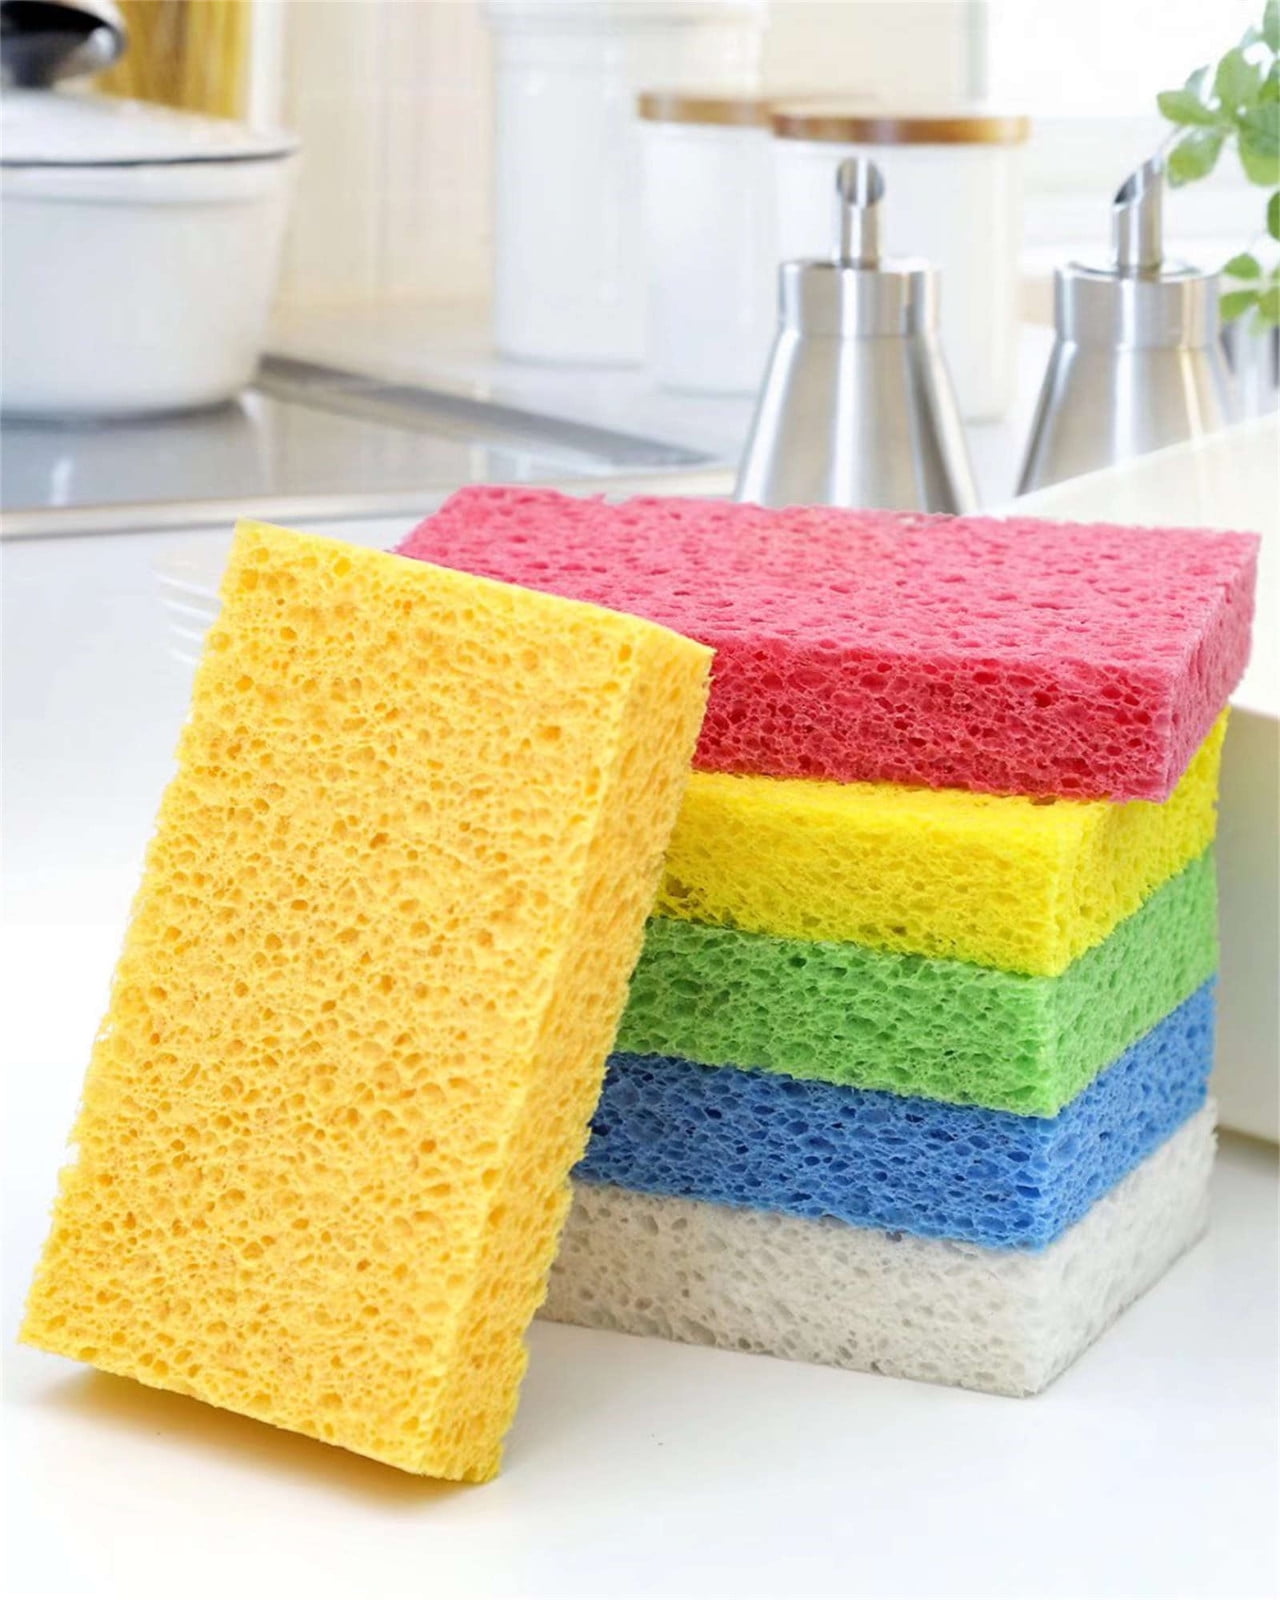 Large Kitchen Sponges for Dishes,Pop Up Eco Friendly Bathroom Cleaning  Sponge for Countertop,Tiles,Walls,Floors,Natural Compostable Scrubber for